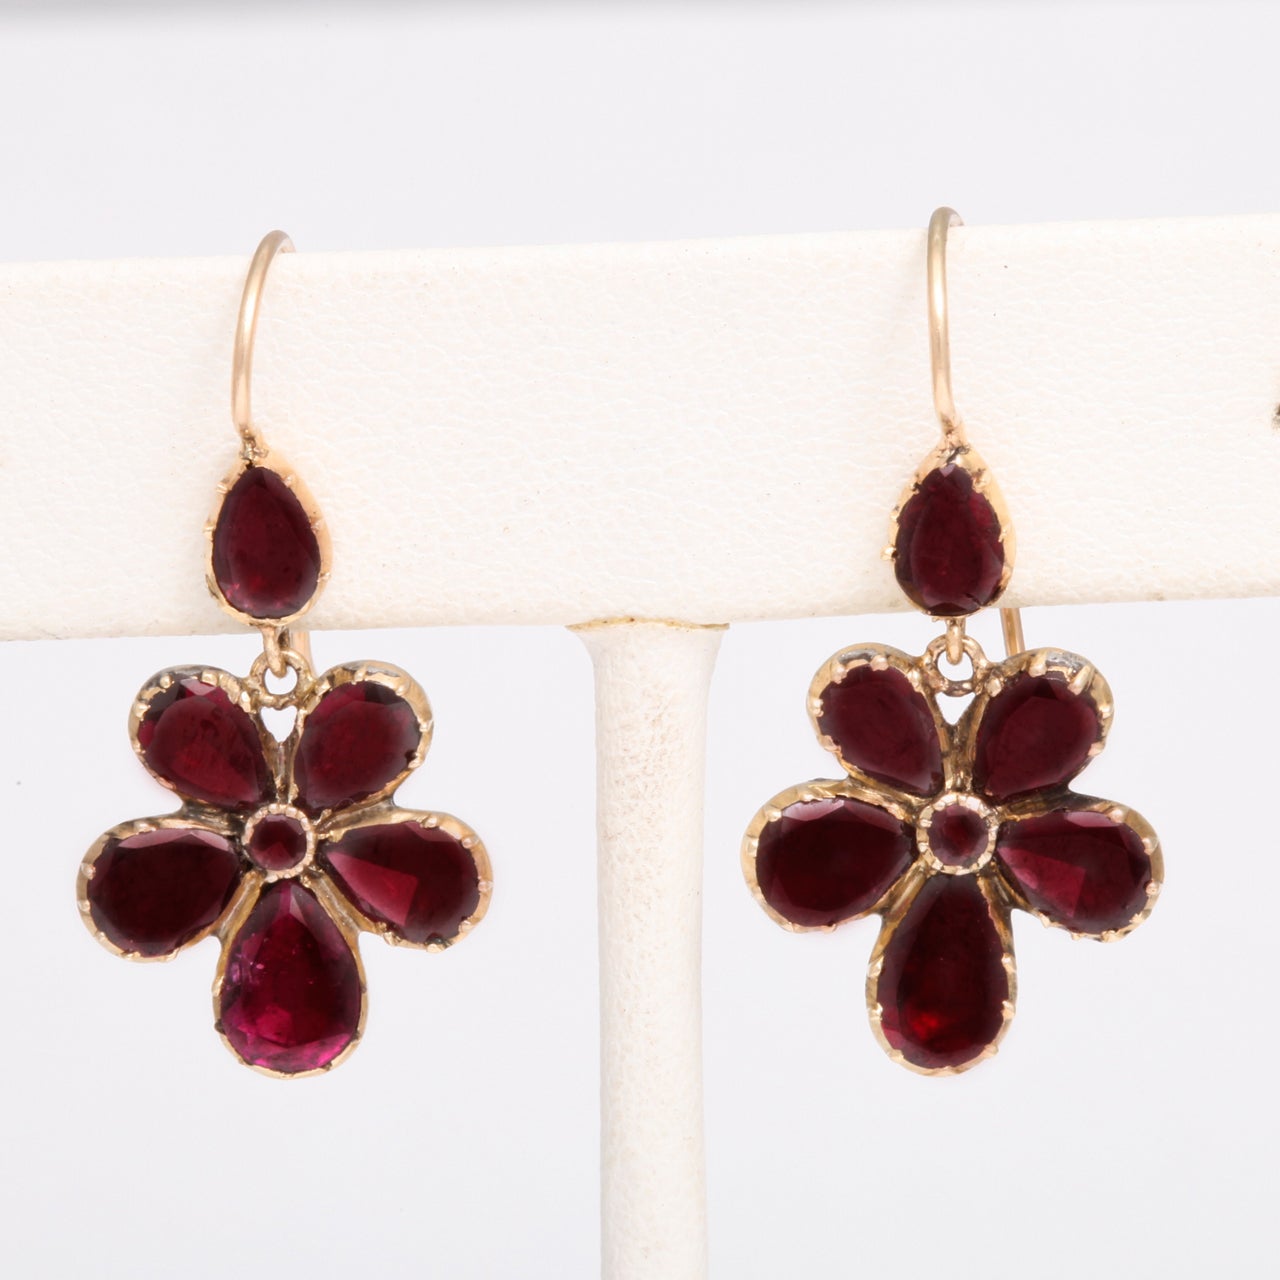 These Georgian foiled garnet earrings will be a love token from the person who gives them their lady love. They bring the message 